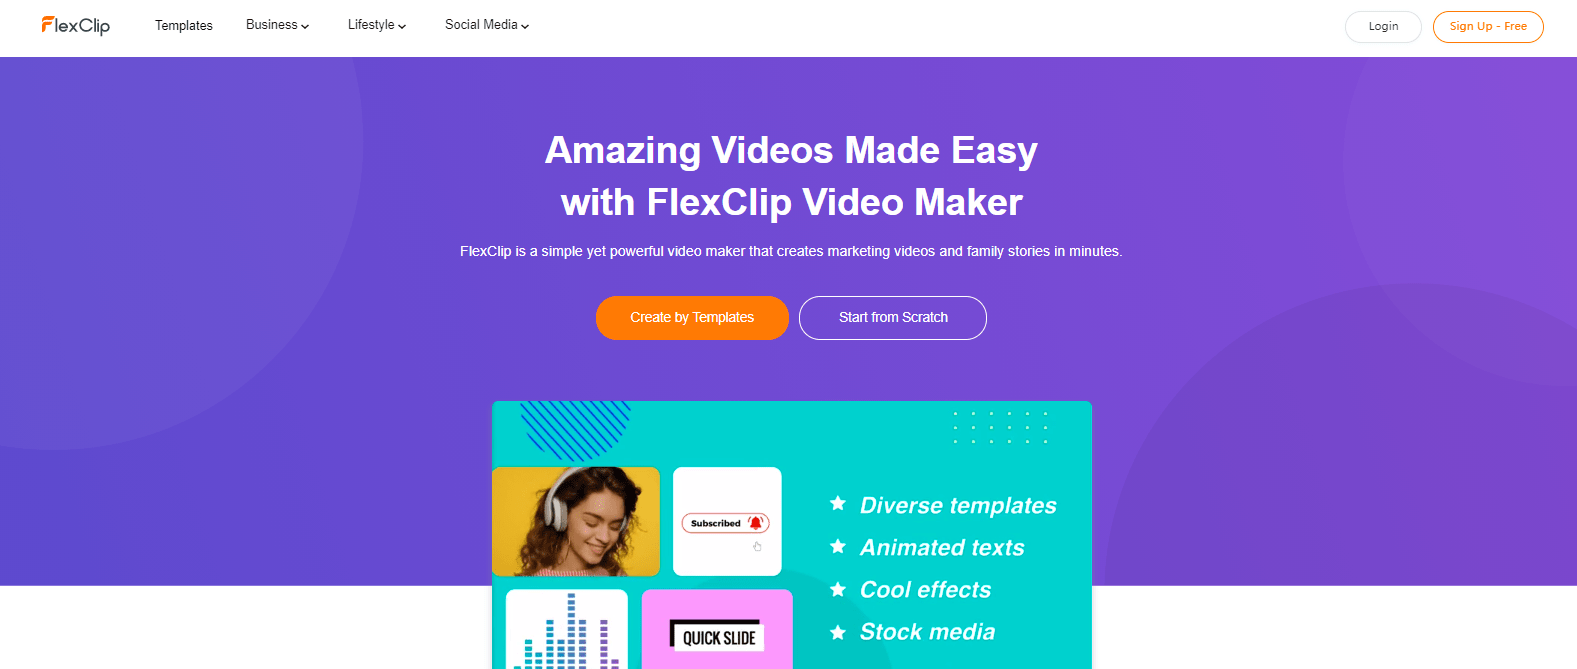 FlexClip, an excellent tool for making videos online